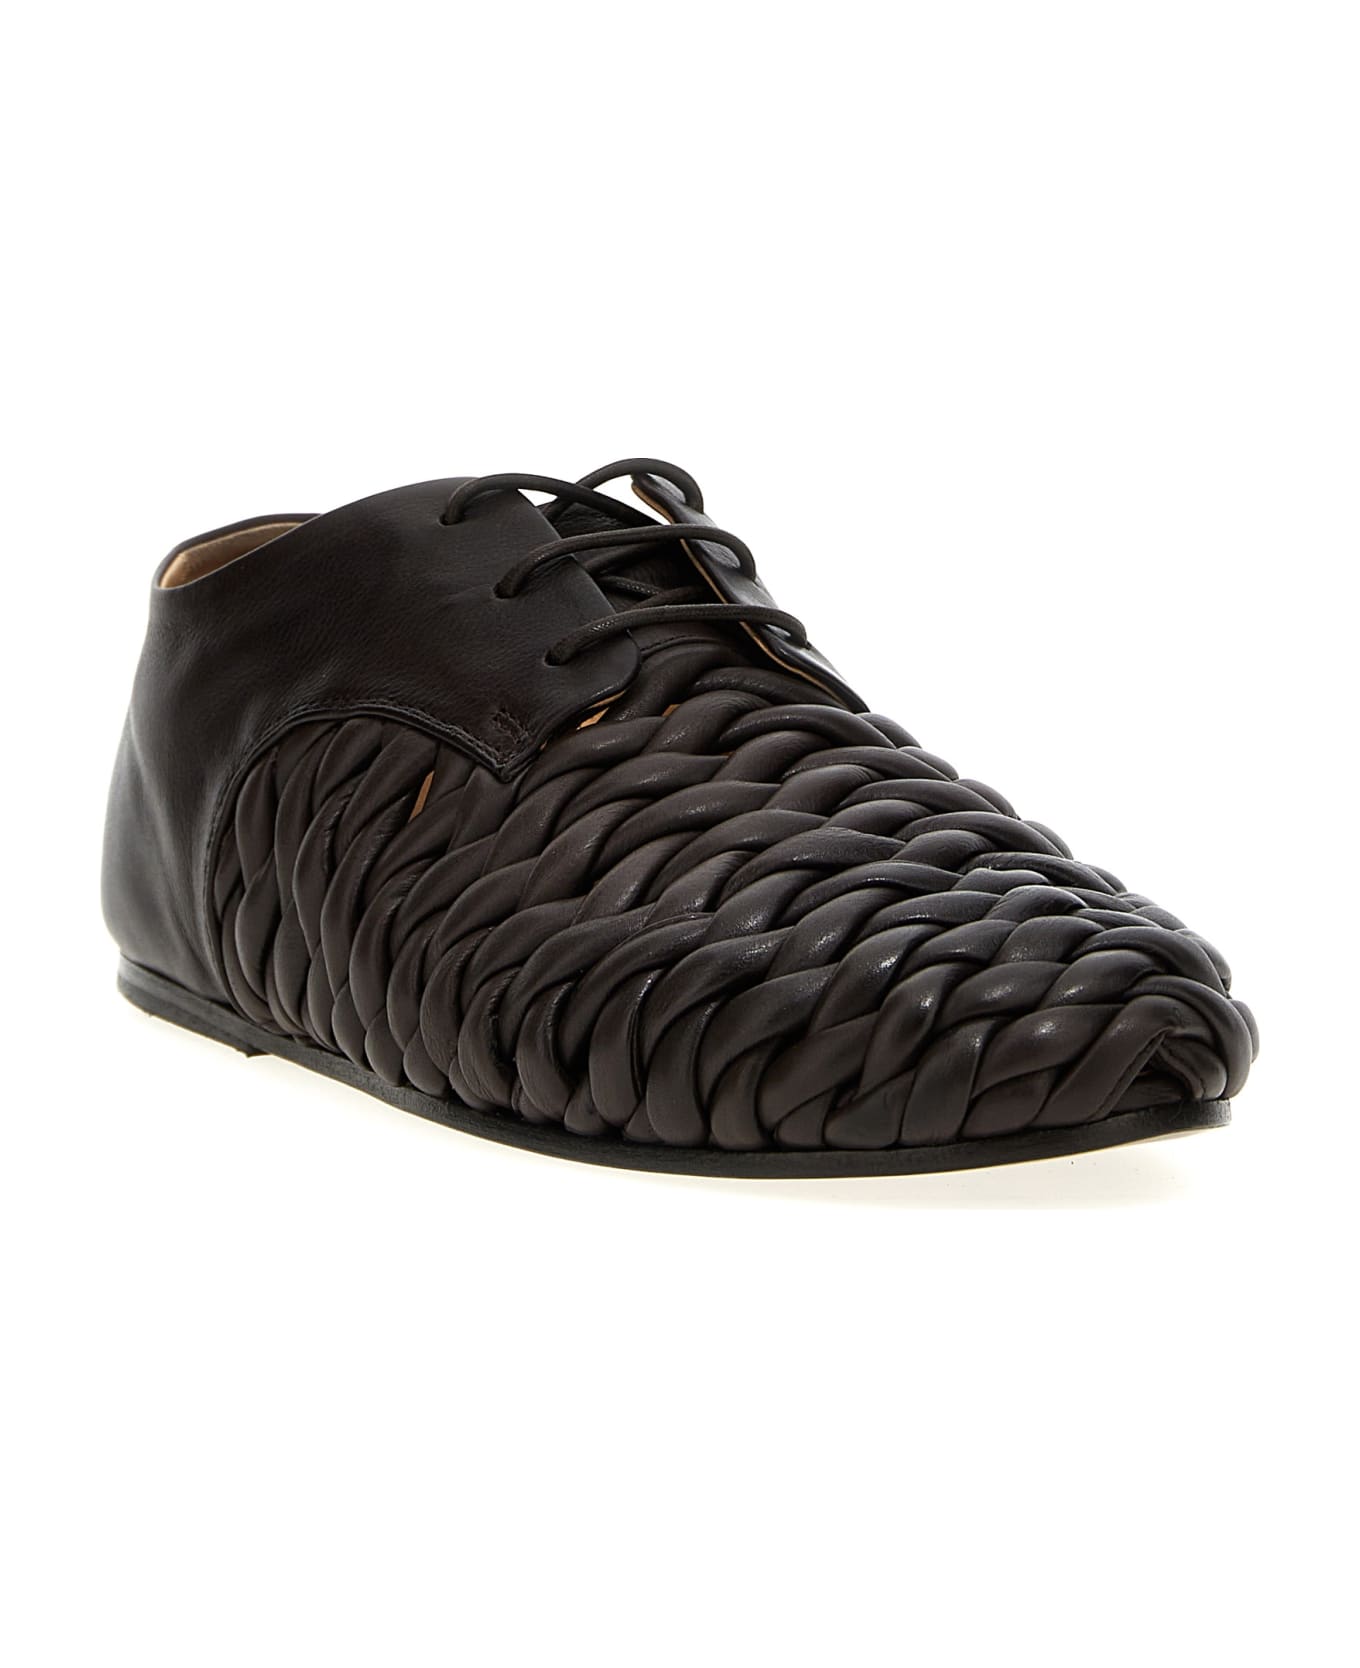 Marsell 'steccoblocco' Lace-up Shoes - Brown